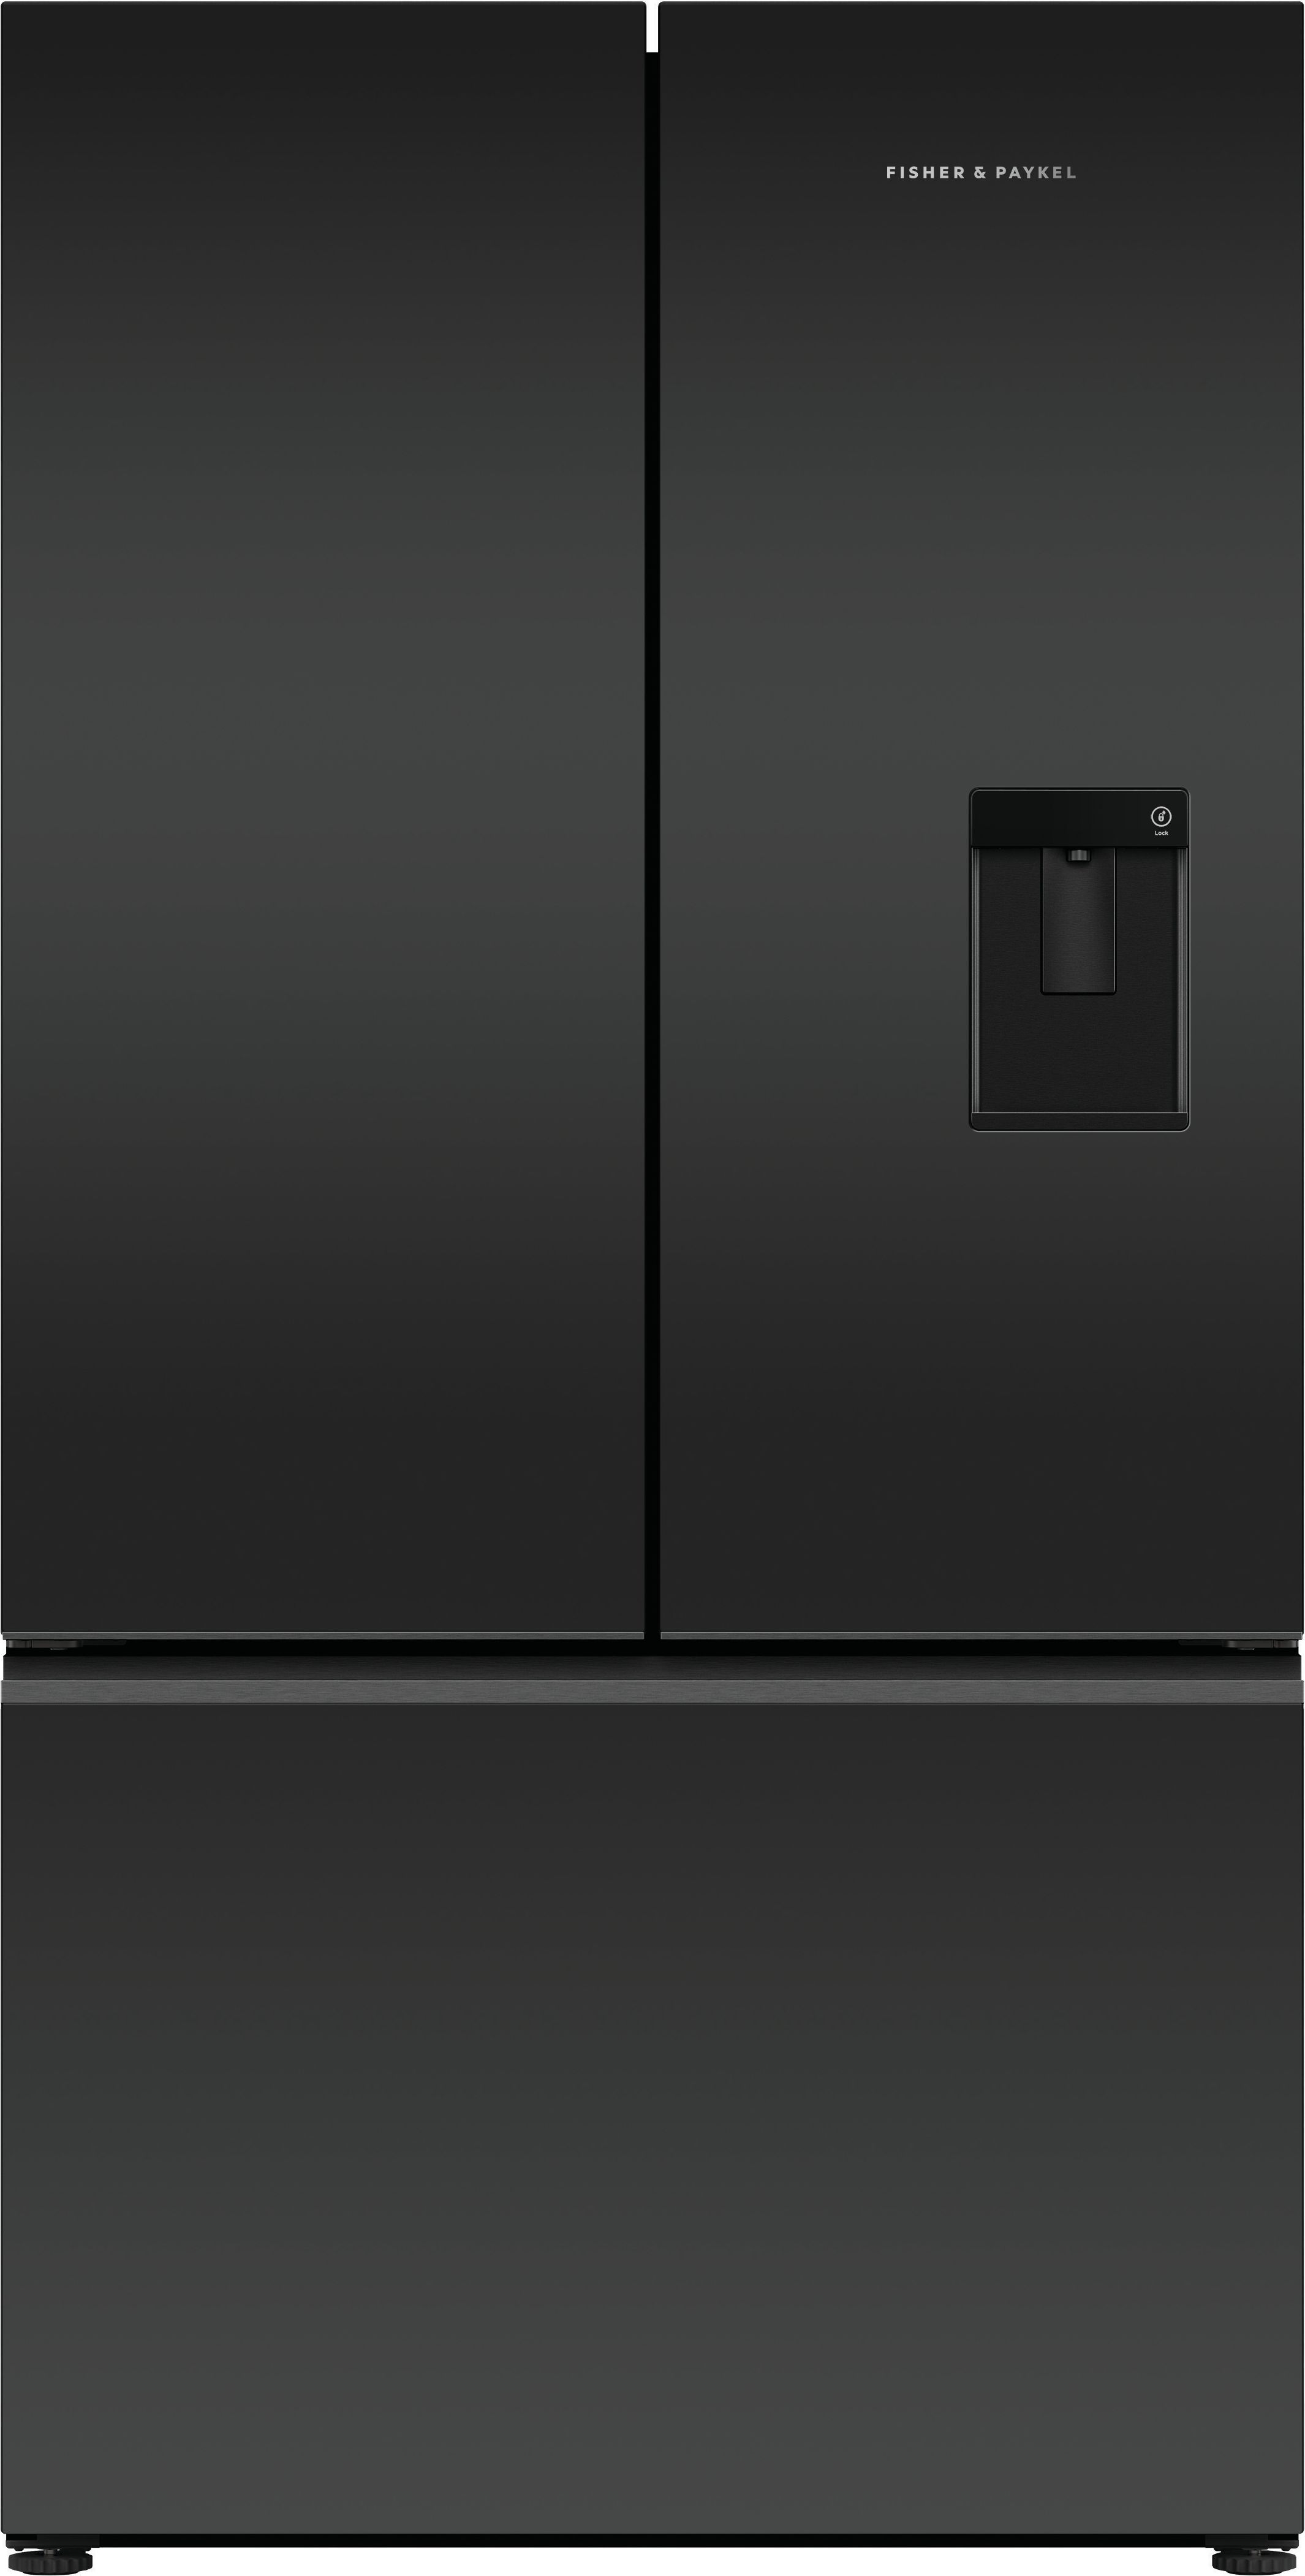 Fisher & Paykel Series 7 Contemporary RF540AZUB6 Wifi Connected Plumbed Frost Free American Fridge Freezer - Matte Black - E Rated, Black